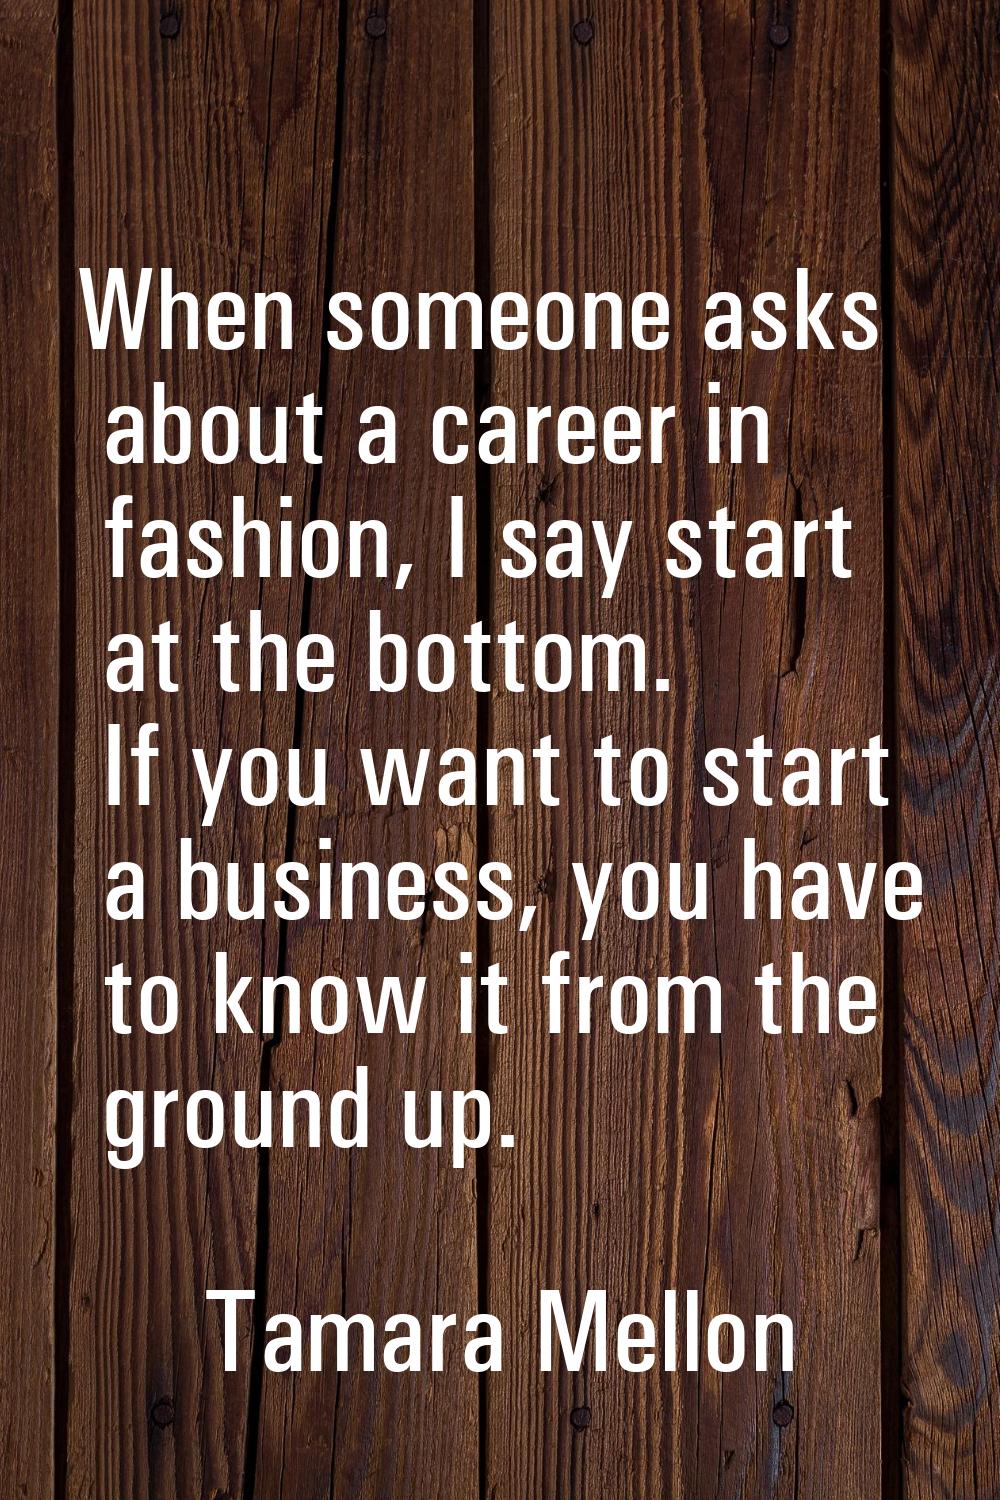 When someone asks about a career in fashion, I say start at the bottom. If you want to start a busi